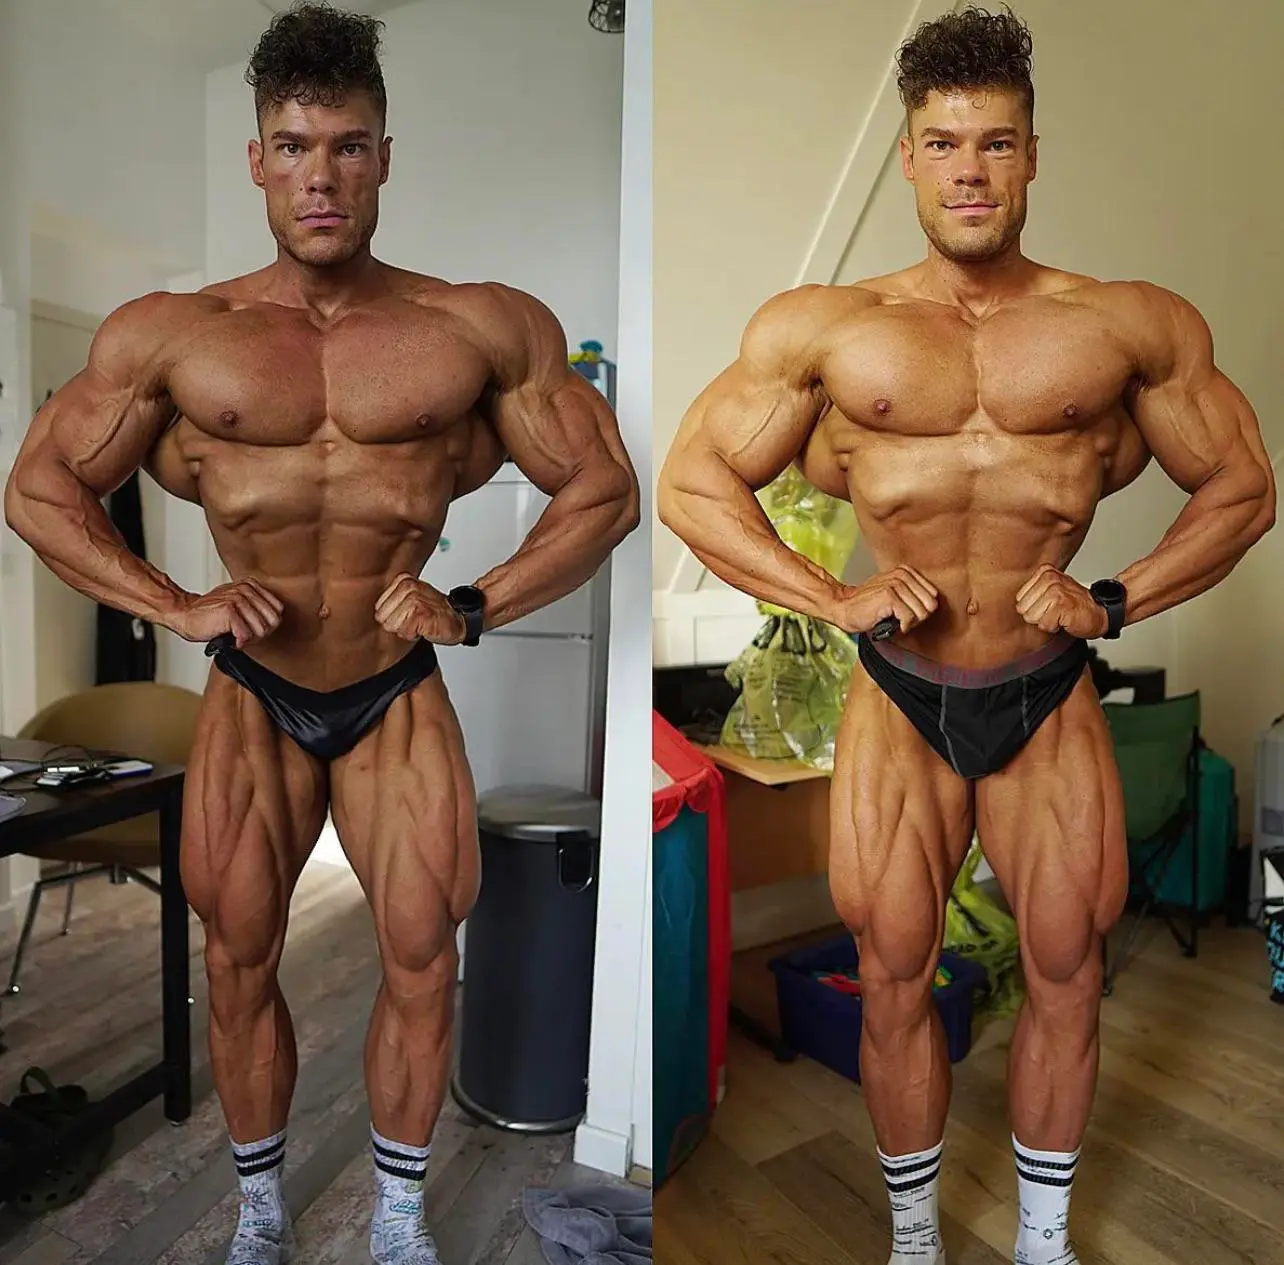 Wesley Vissers, Bio, Age, Height, Weight, Arnold Classic